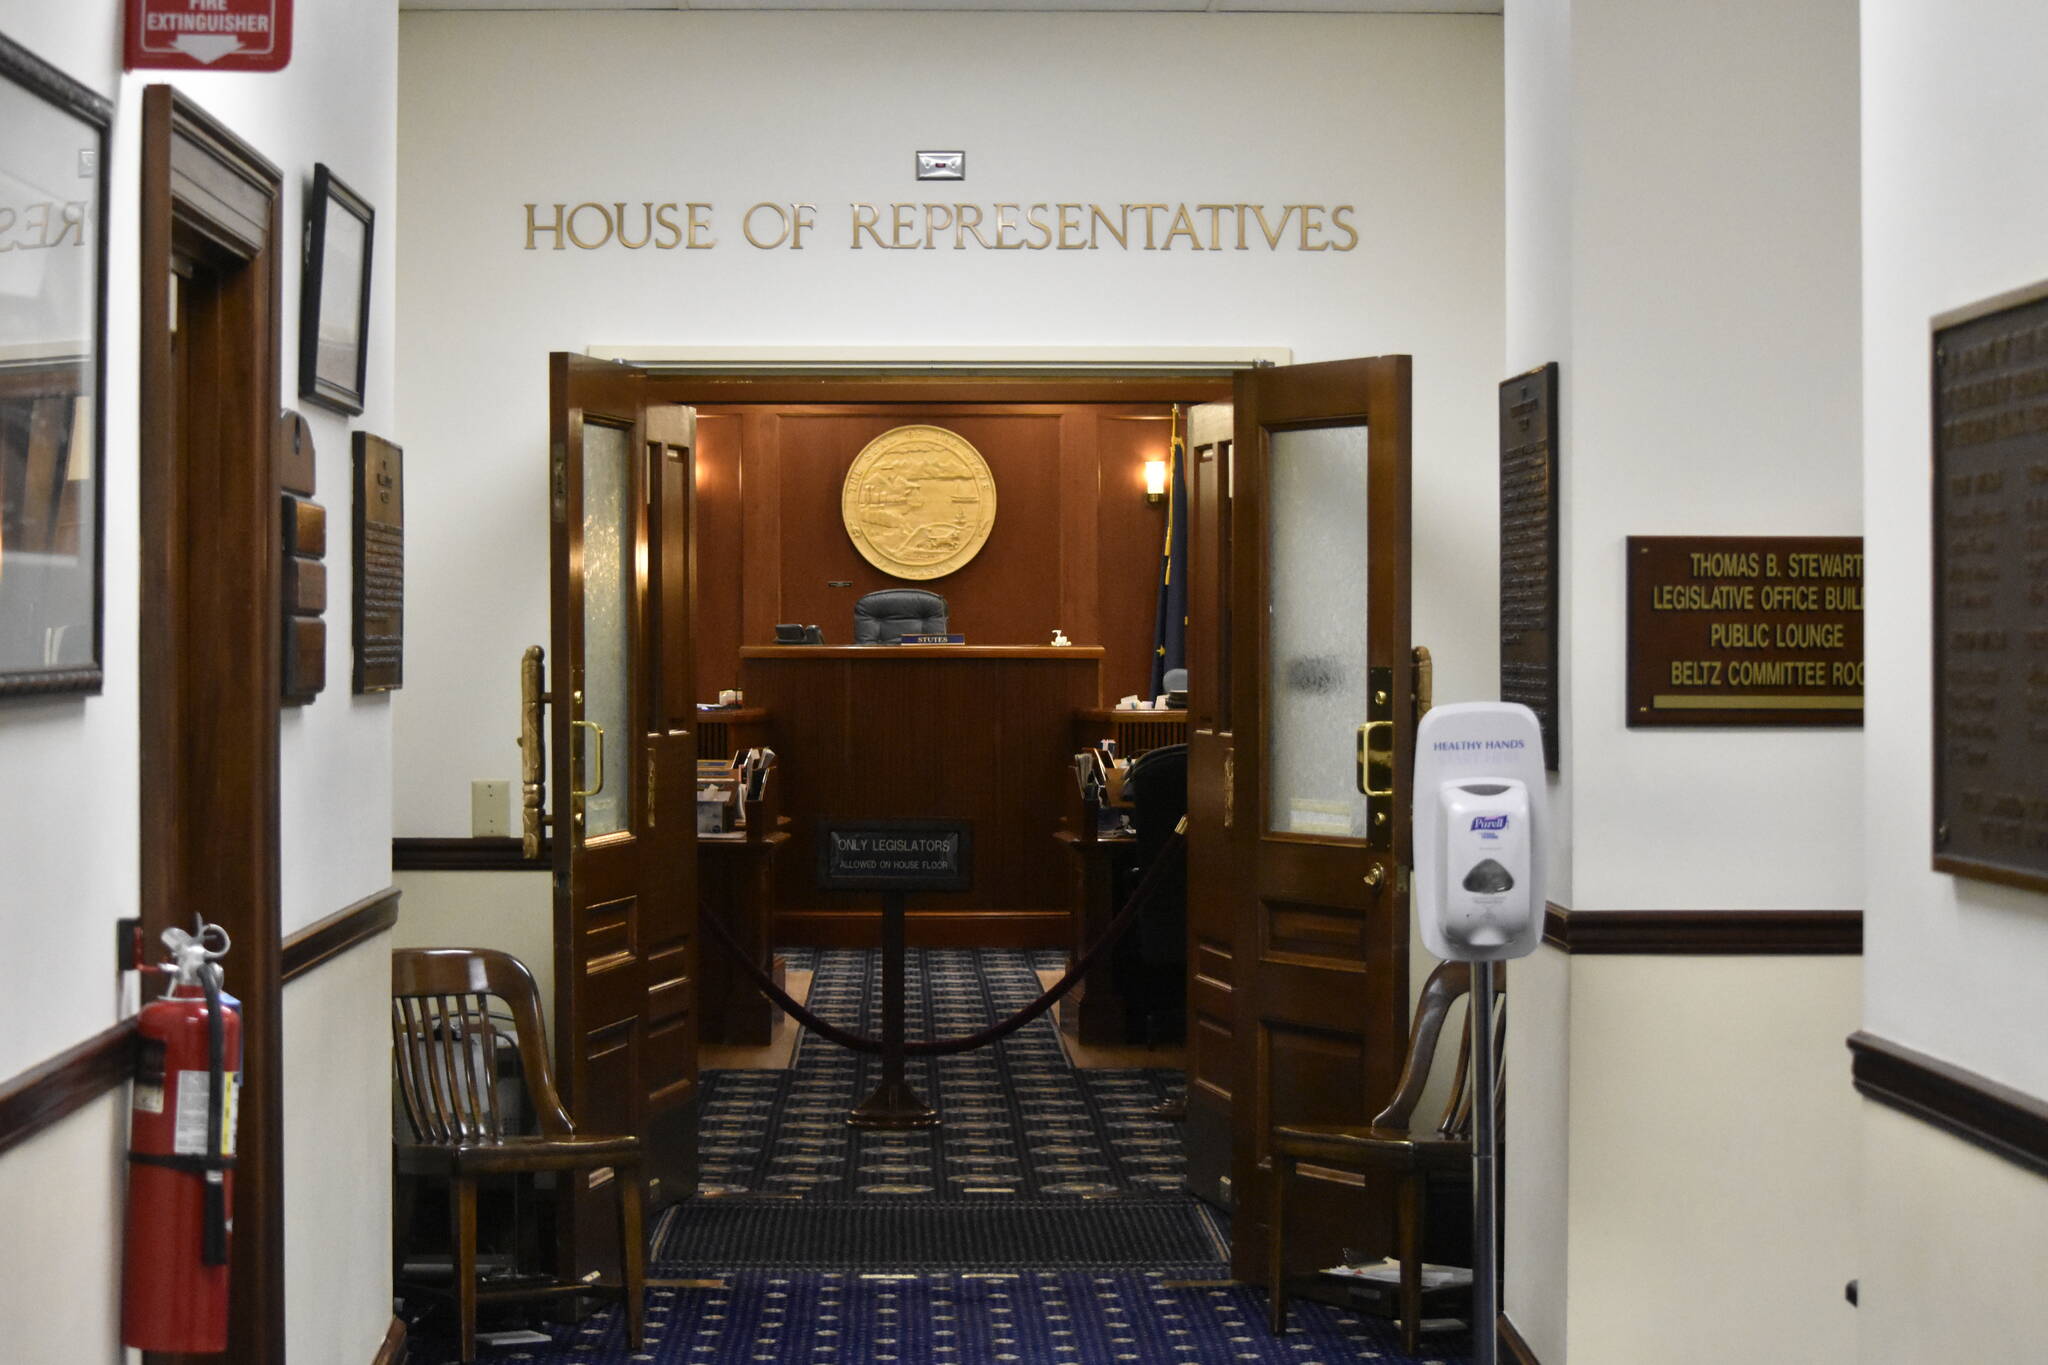 Members of the Alaska House of Representatives has 87 amendments submitted to the state’s operating budget bill and intends to spend the rest of the week in floor session working through them. (Peter Segall / Juneau Empire file)